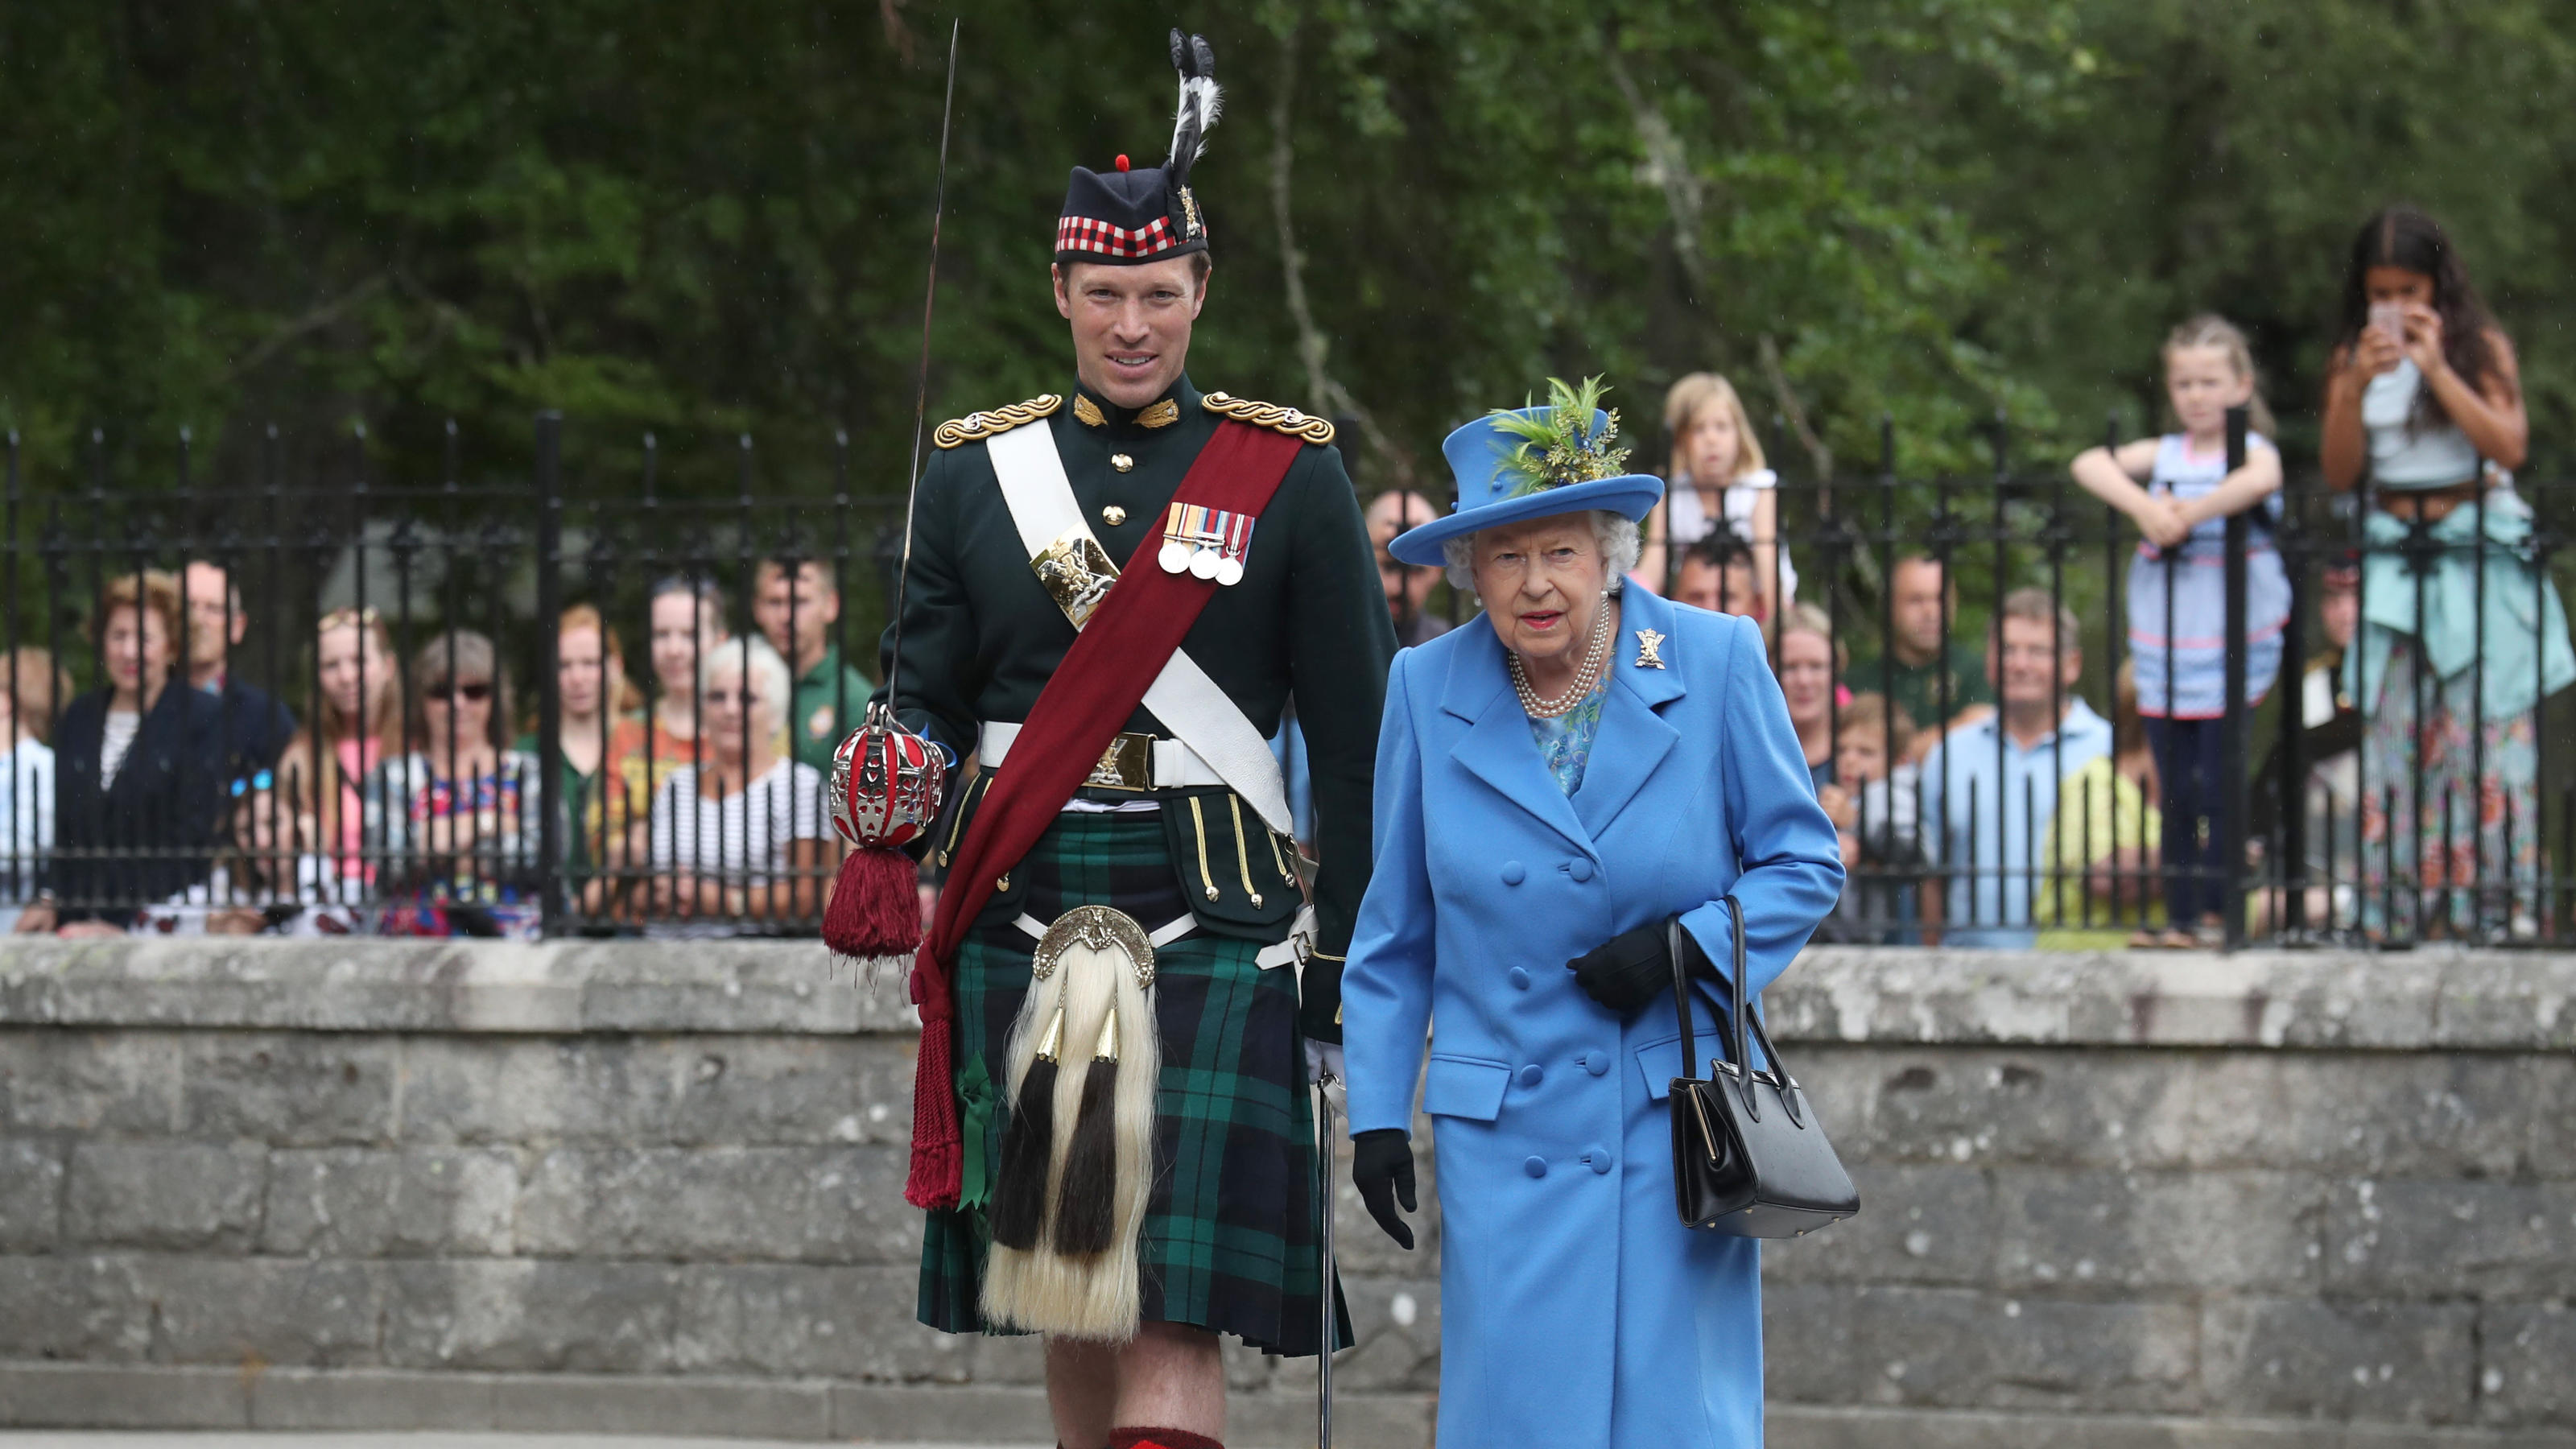 Queen Elizabeth II, with Officer Commanding Major Johnny Thompson, inspects Balaclava Company, 5 Battalion The Royal Regiment of Scotland at the gates at Balmoral, as she takes up summer residence at the castle.